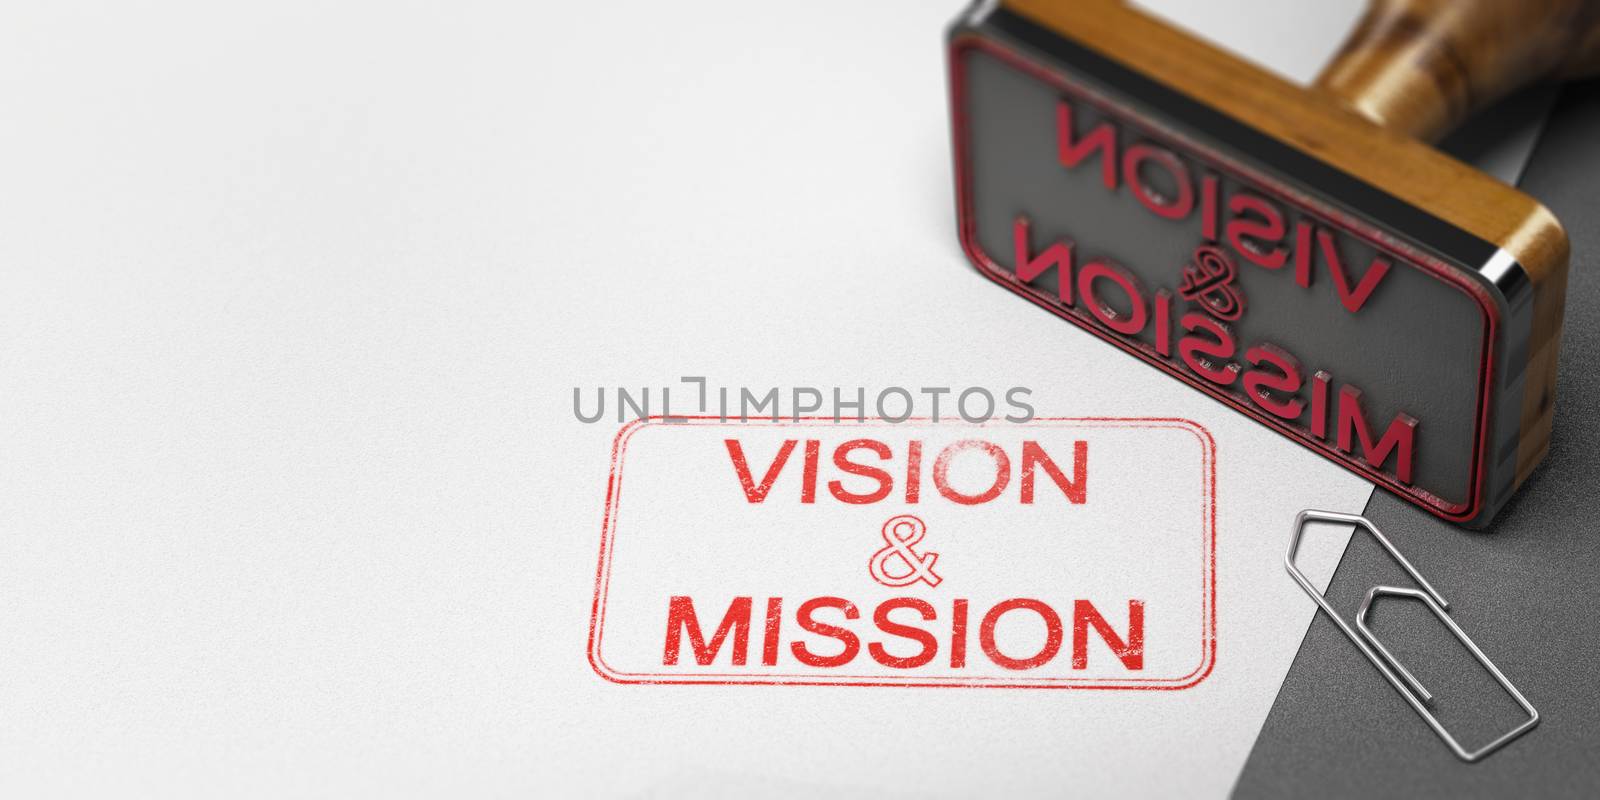 3D illustration of a rubber stamp with other office supplies and the text vision and mission on a sheet of paper.